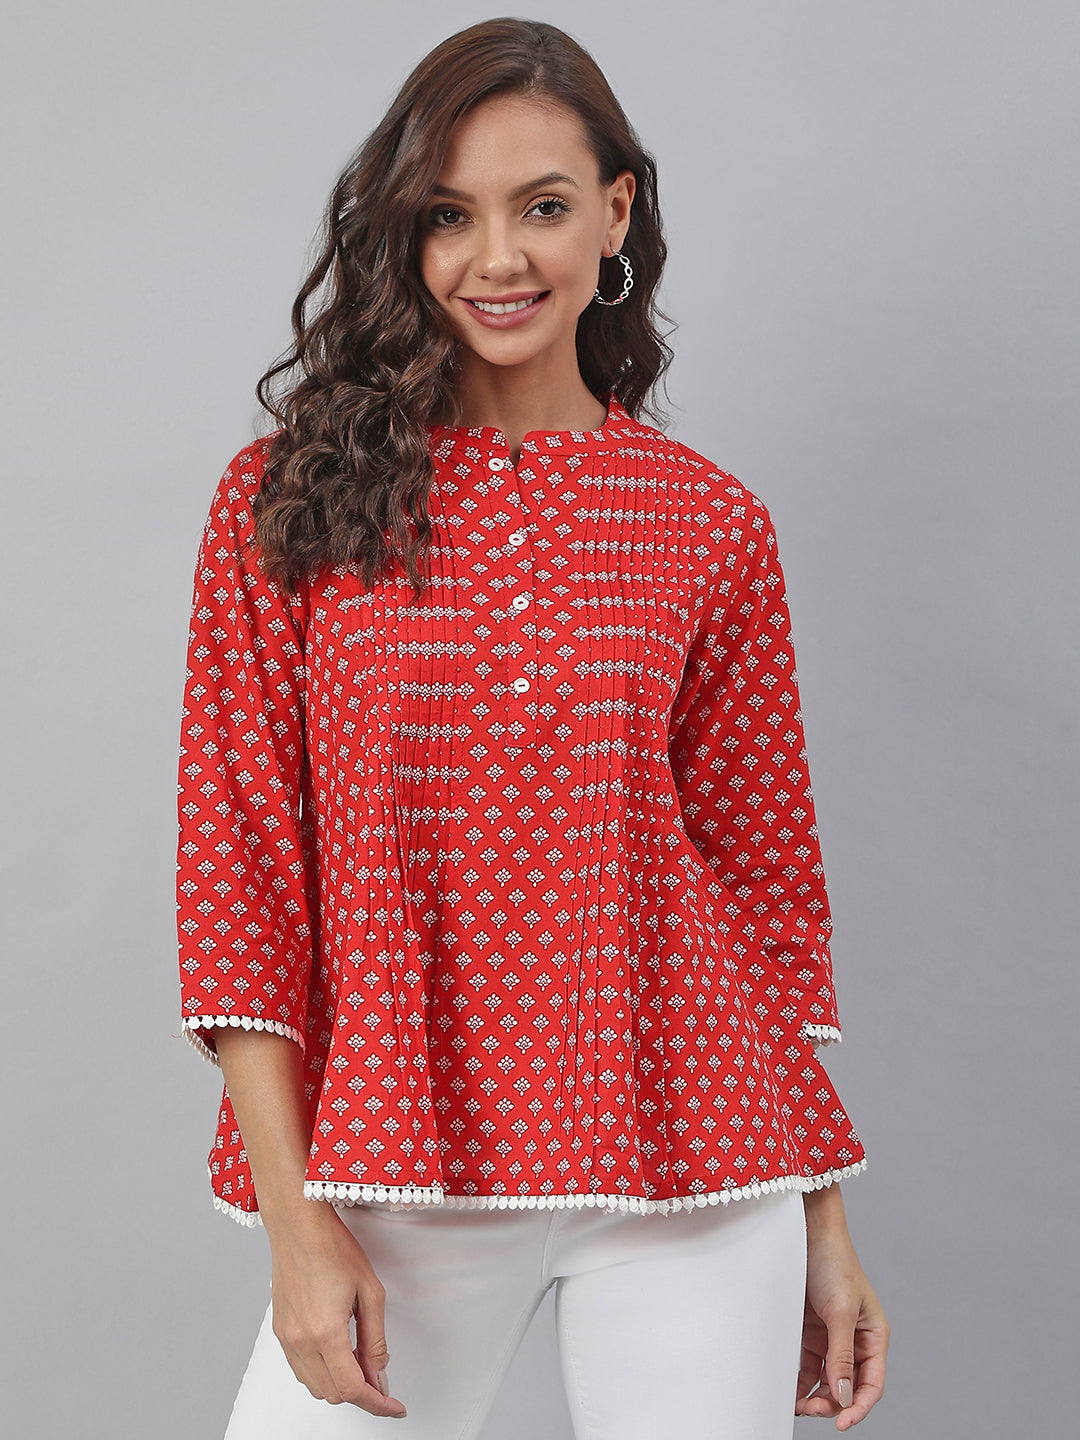 Women's Red Cotton Floral Print Flared Top - Manohara